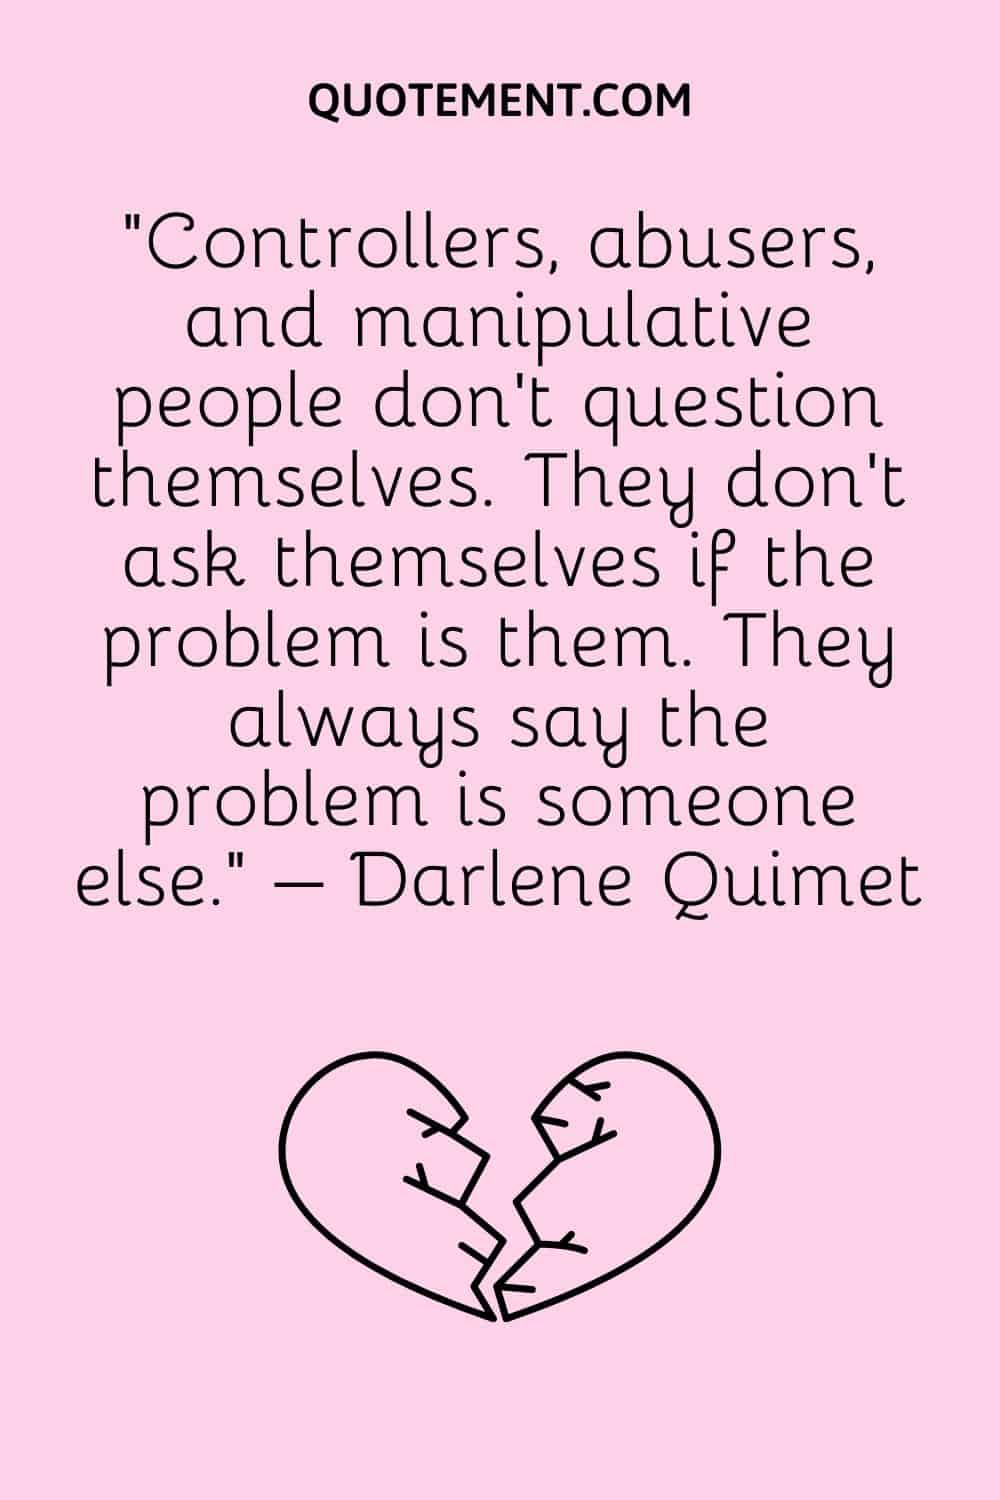 “Controllers, abusers, and manipulative people don’t question themselves. They don’t ask themselves if the problem is them. They always say the problem is someone else.” – Darlene Quimet